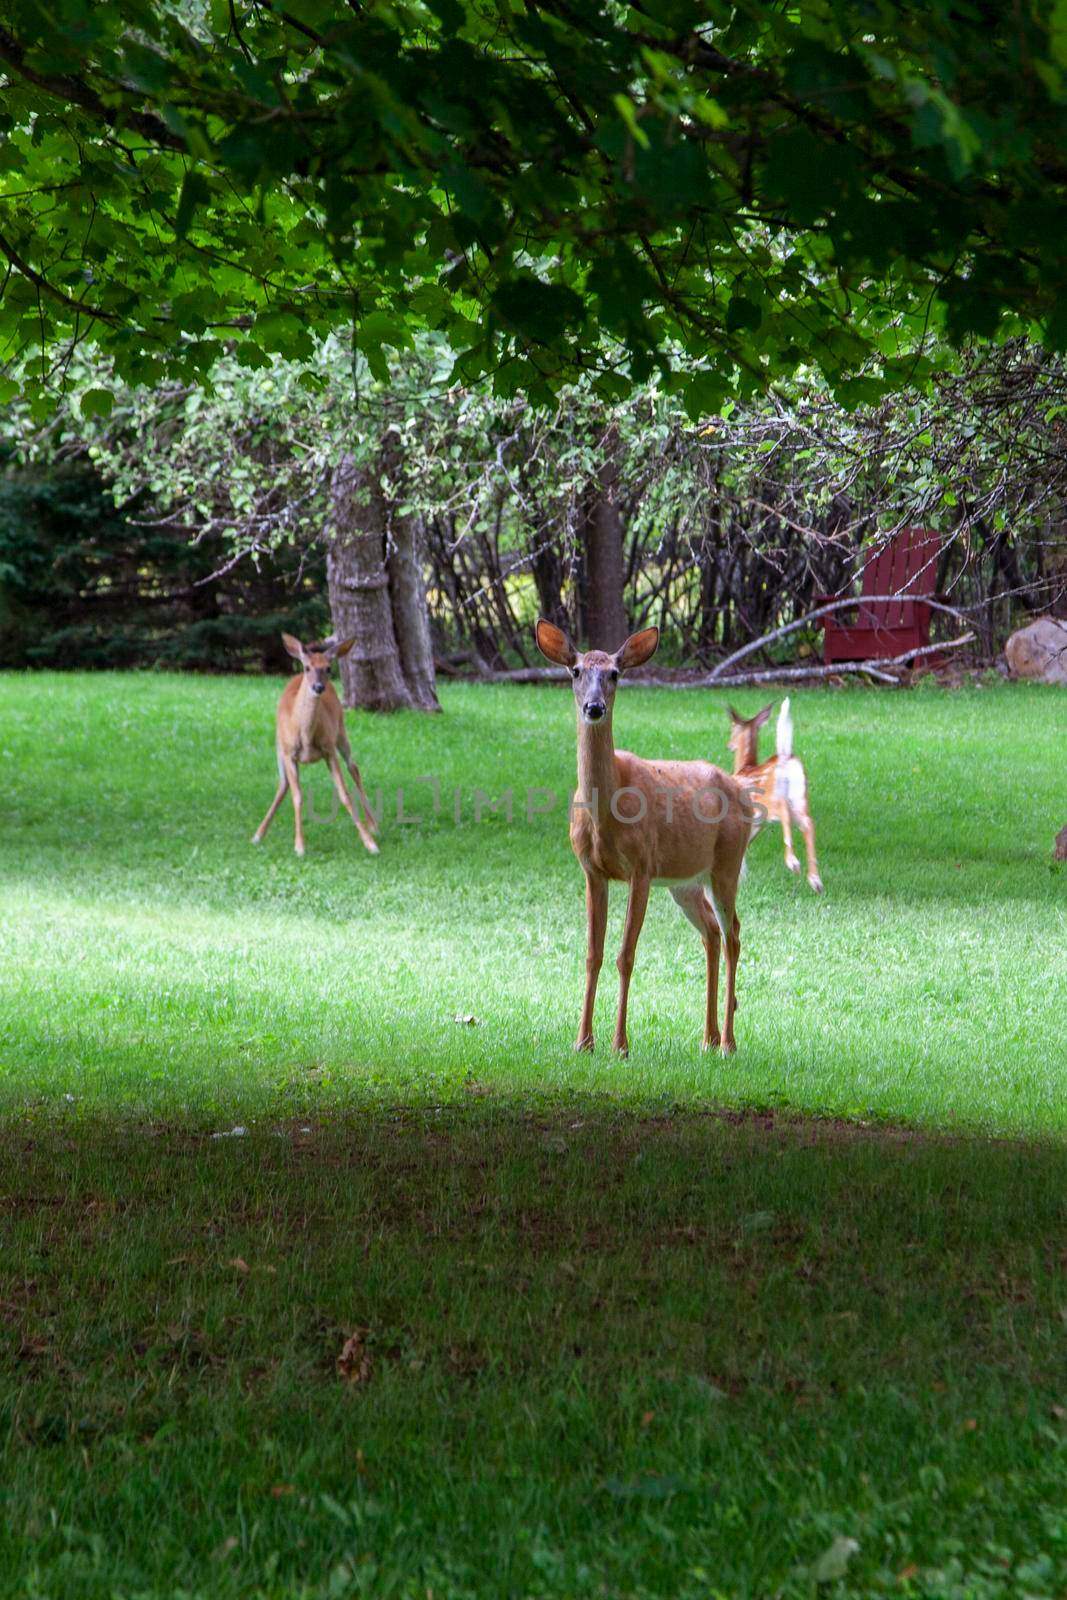  a female deer stands in front of her young, protectively, as the photographer approaches